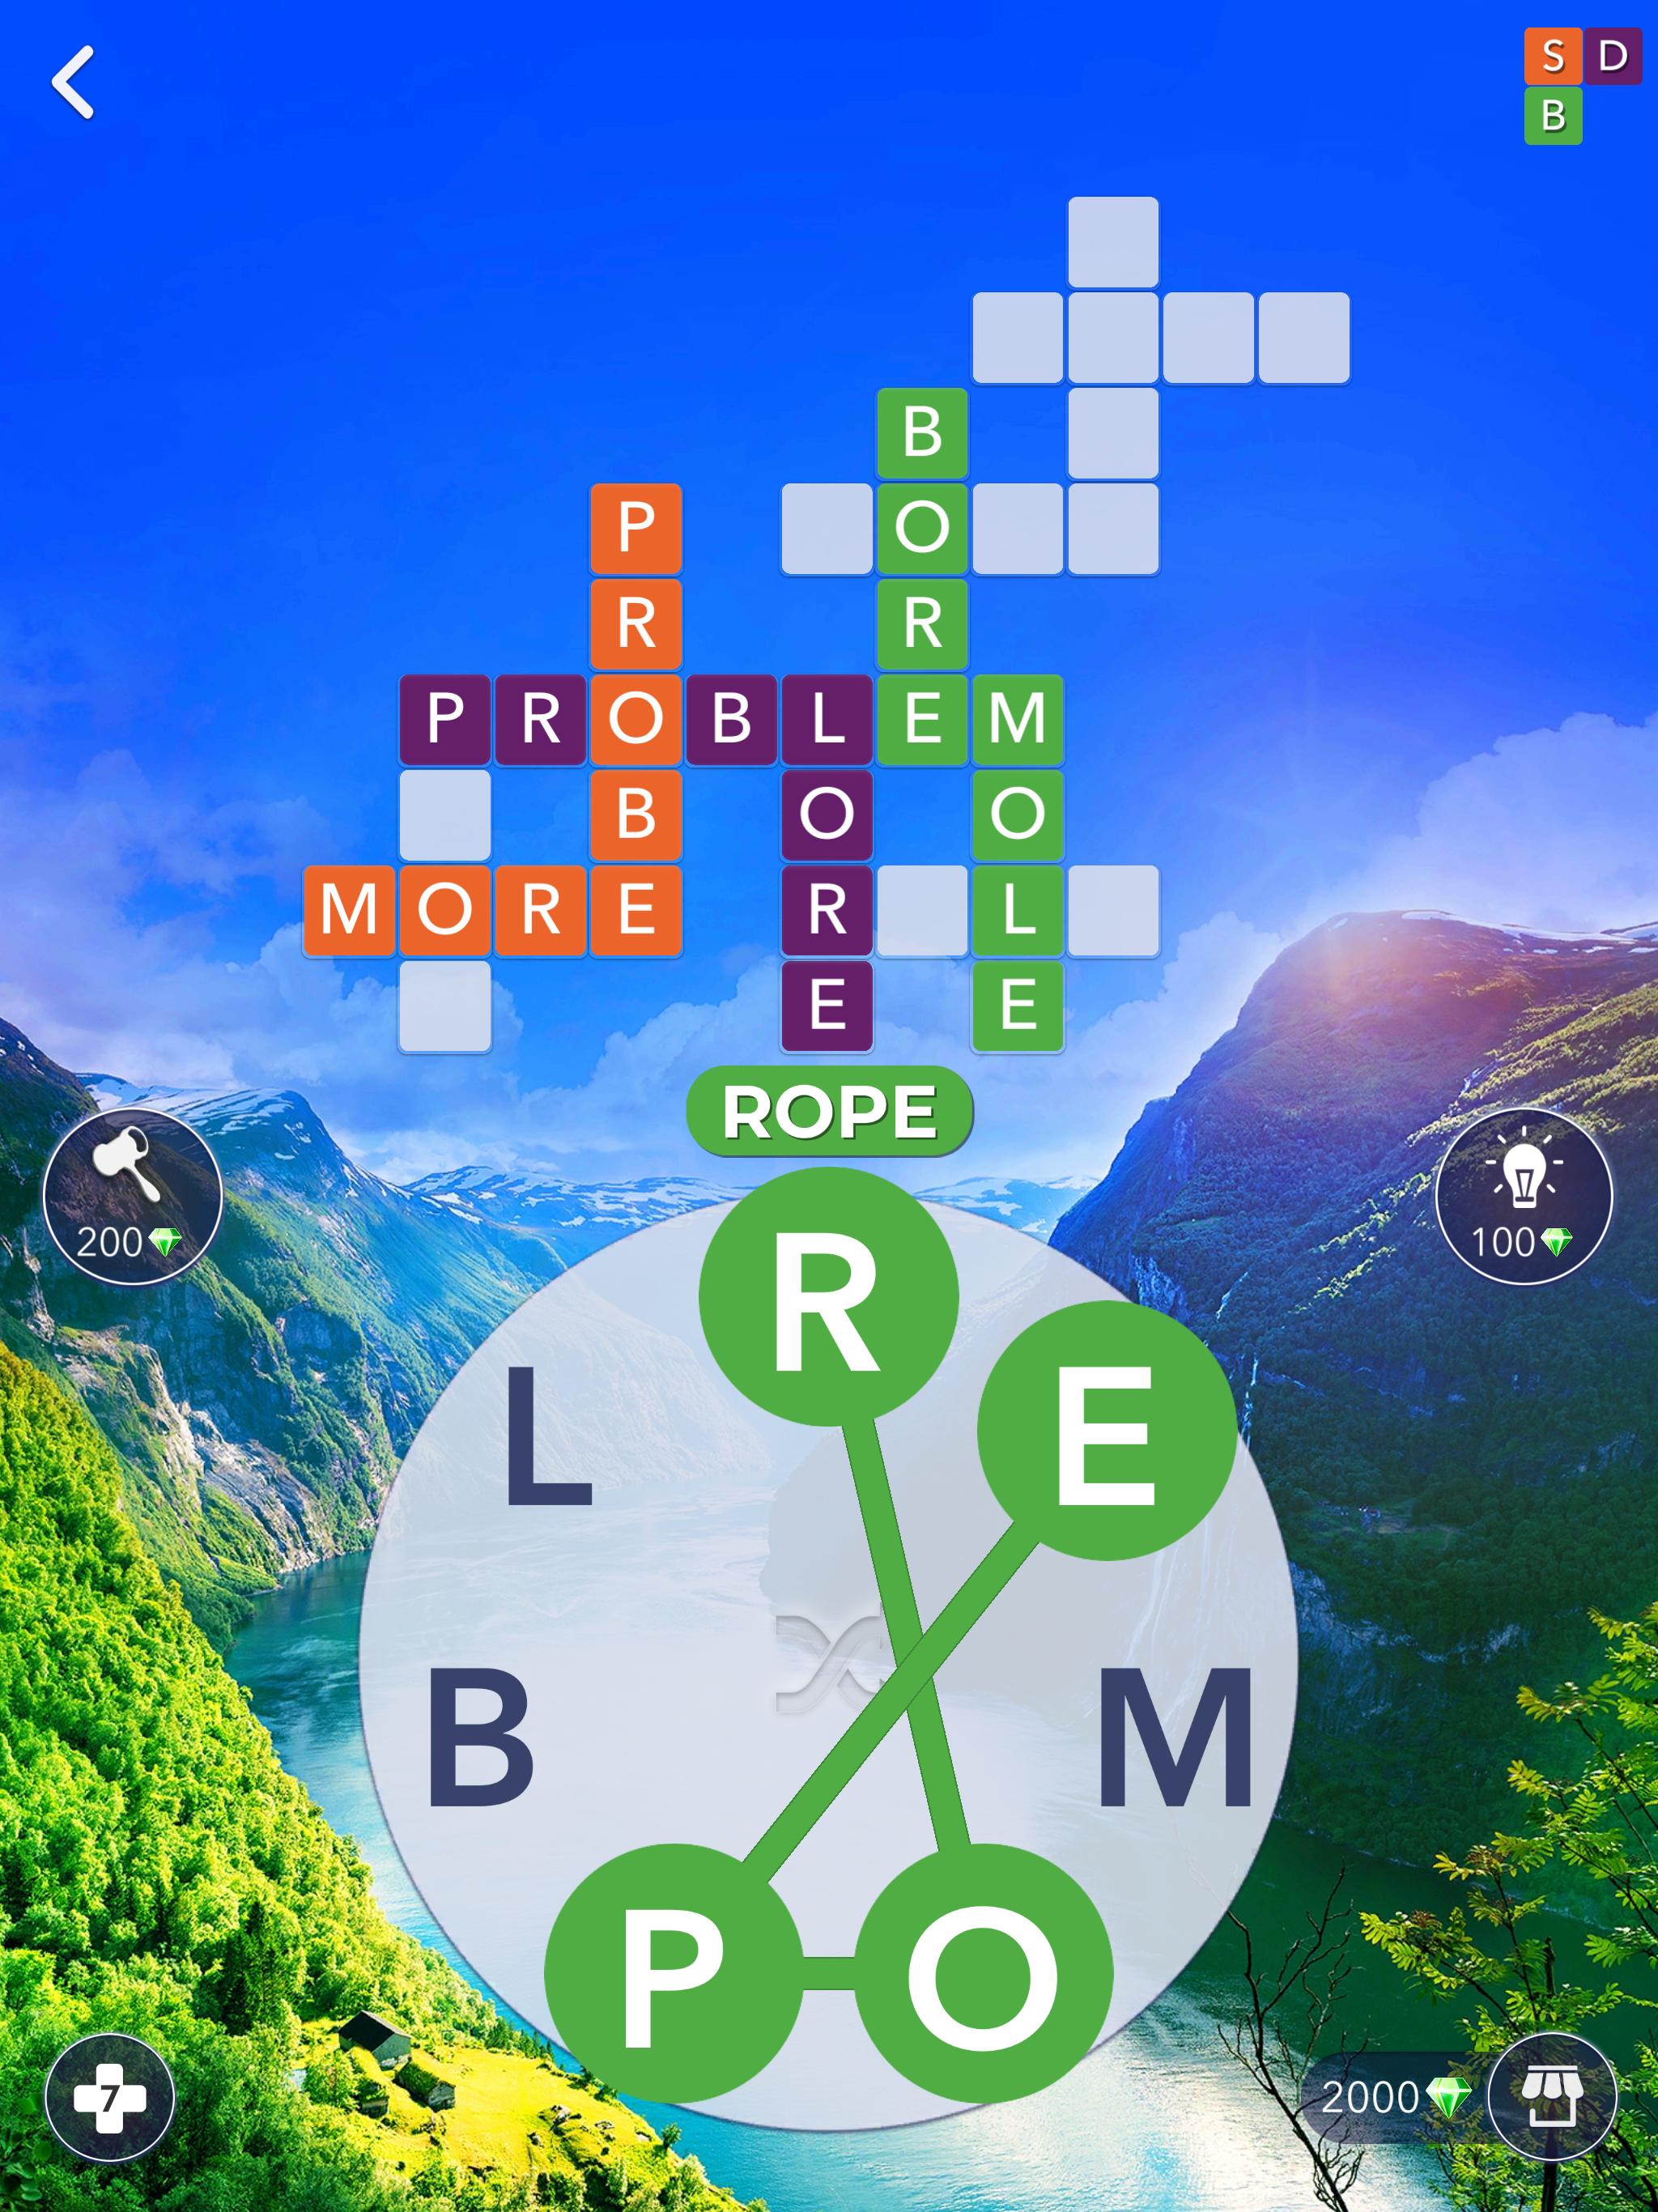 Words of Wonders: Crossword to Connect Vocabulary 2.4.1 Screenshot 13